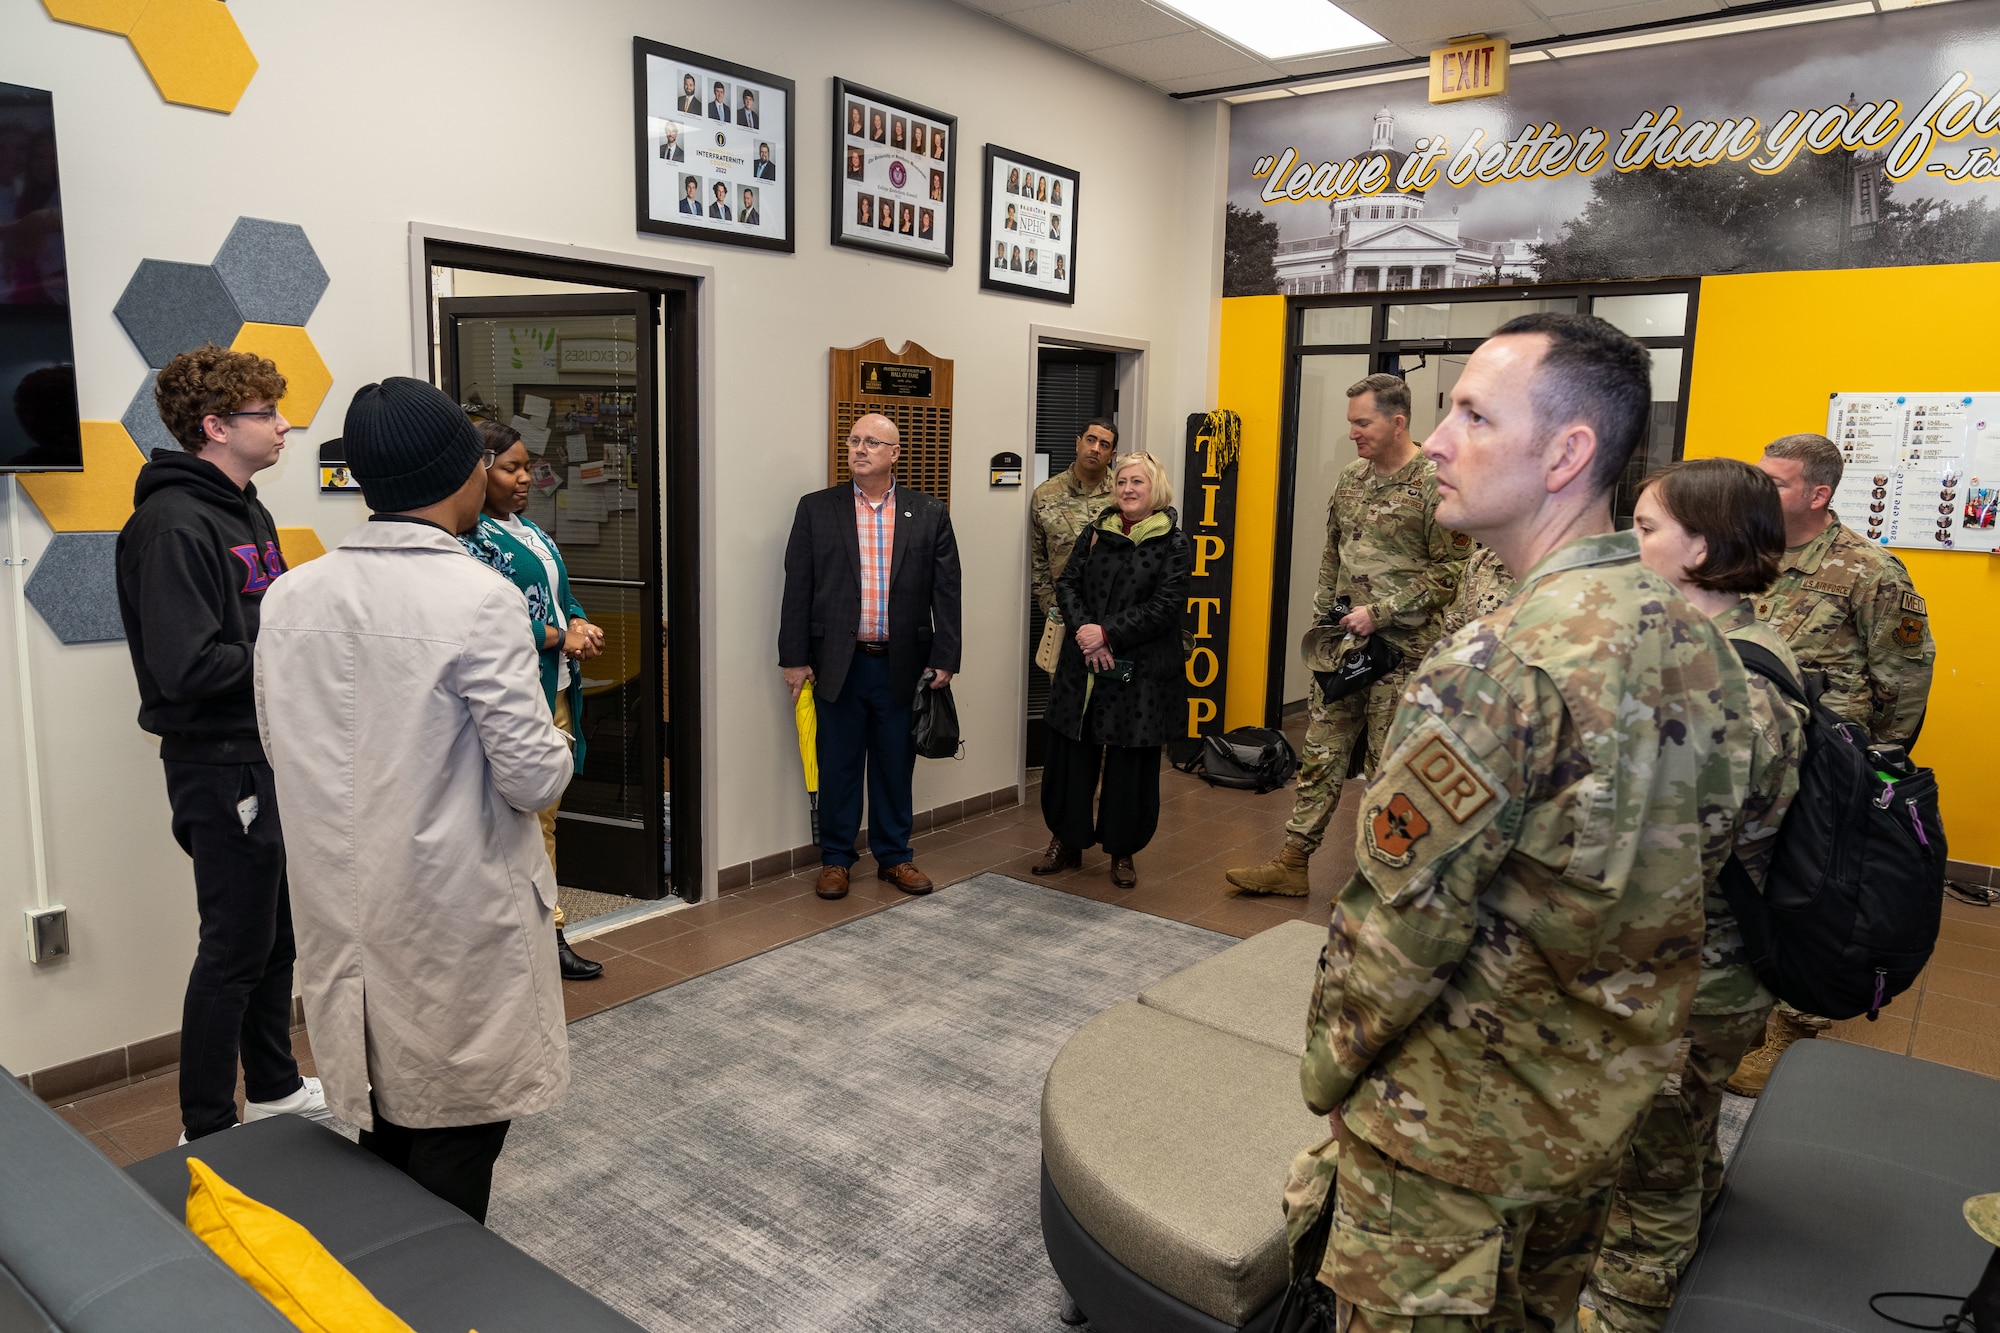 The University of Southern Mississippi alumni describe the activities and services of the Office of Fraternity and Sorority Life to members of the 81st Training Wing in Hattiesburg, Mississippi, March 1, 2024.